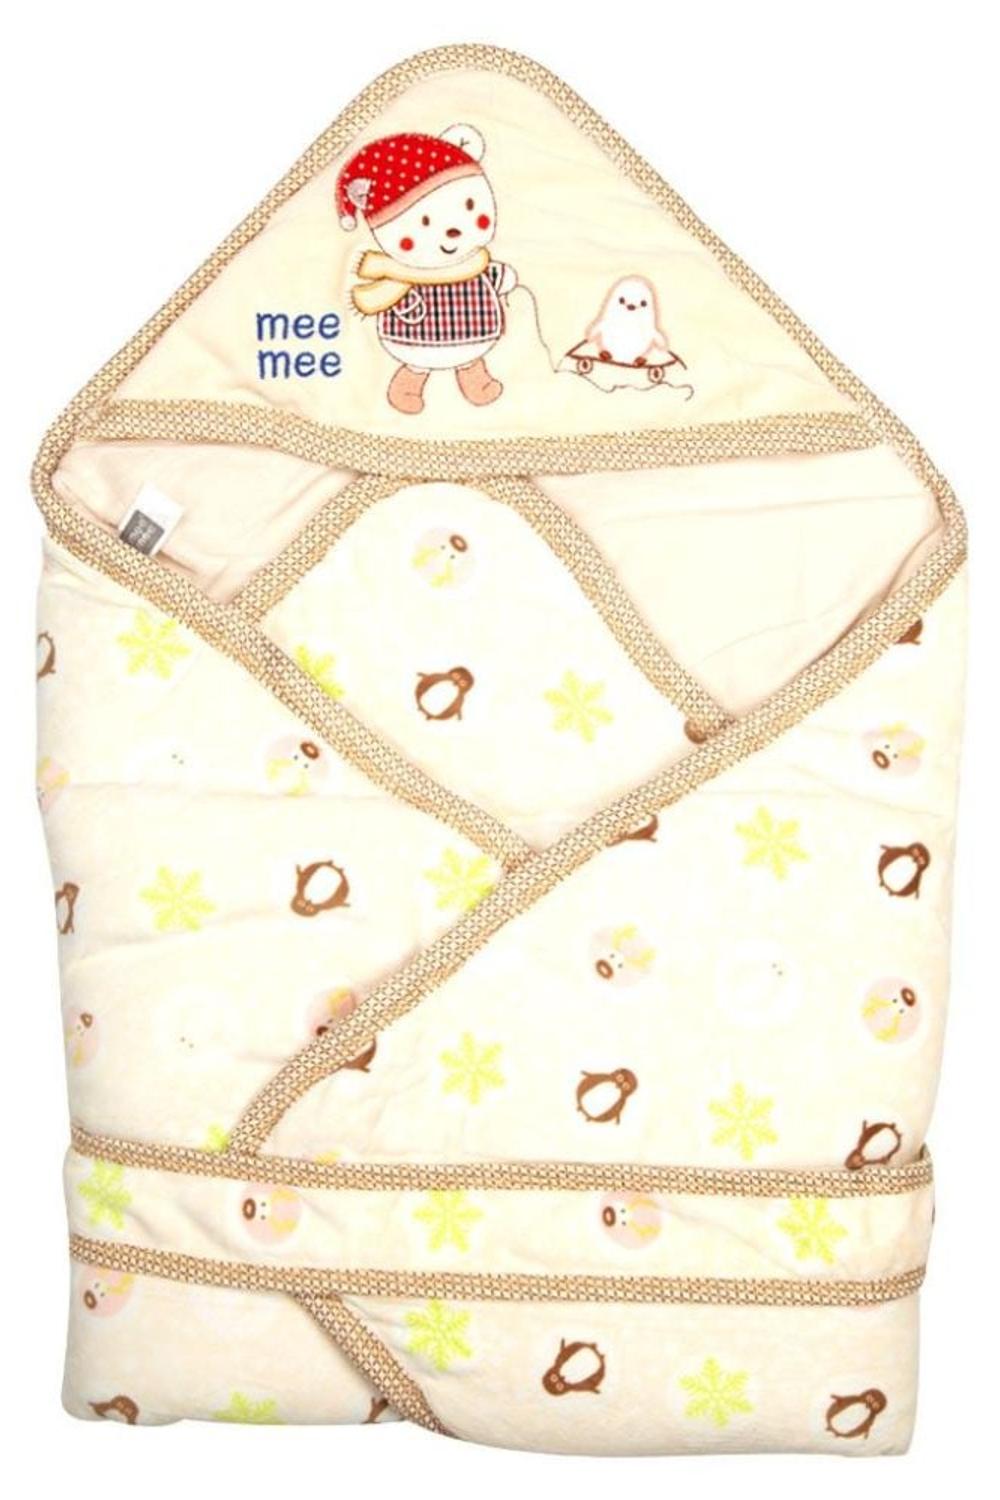 Mee Mee Baby Warm and Soft Swaddle Wrapper with Hood Double Layer for Babies (Cream Printed)